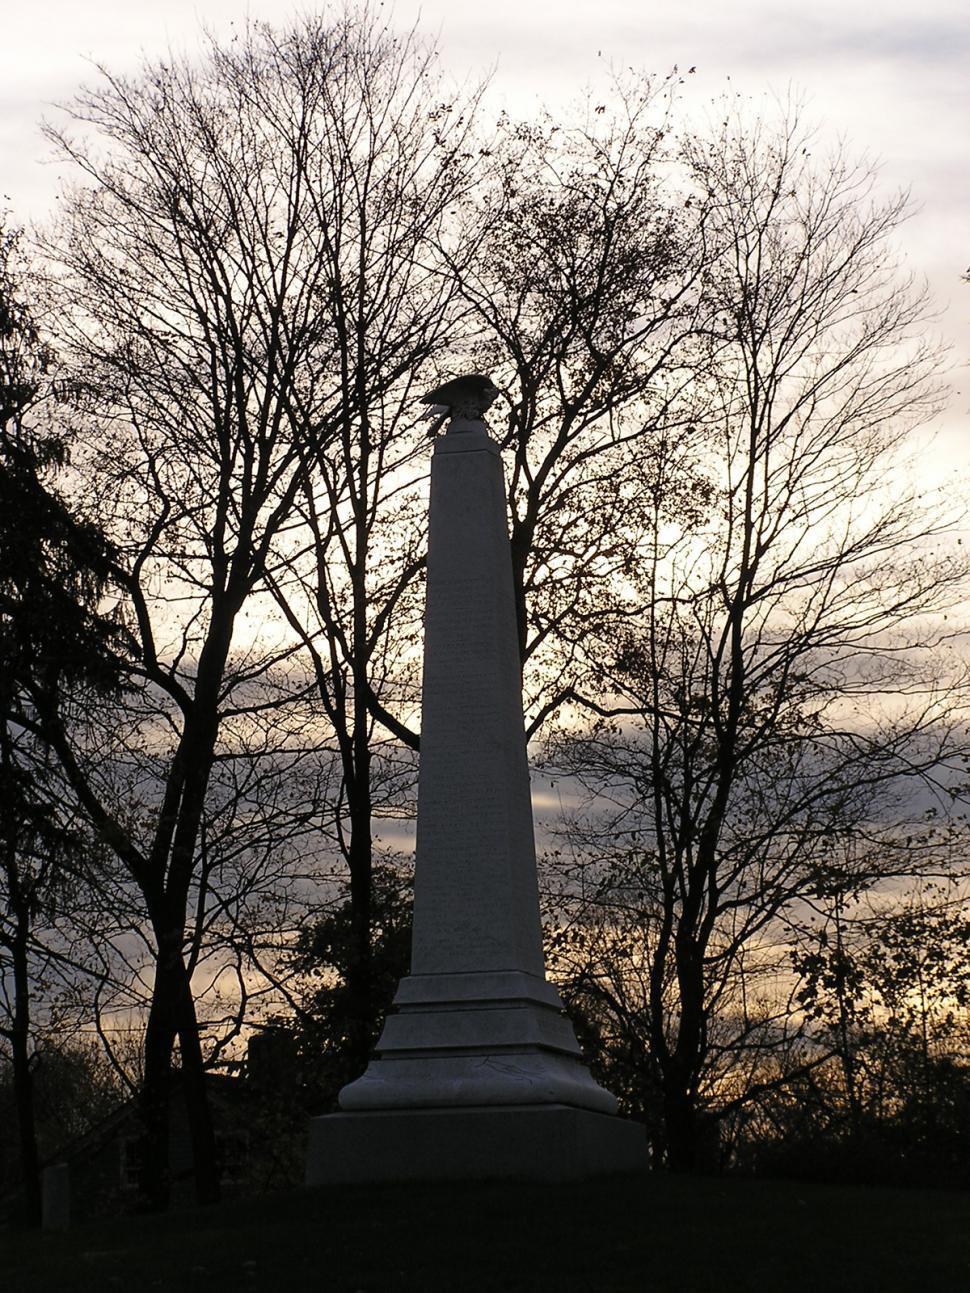 Download Free Stock Photo of Cemetery monument at sunset 